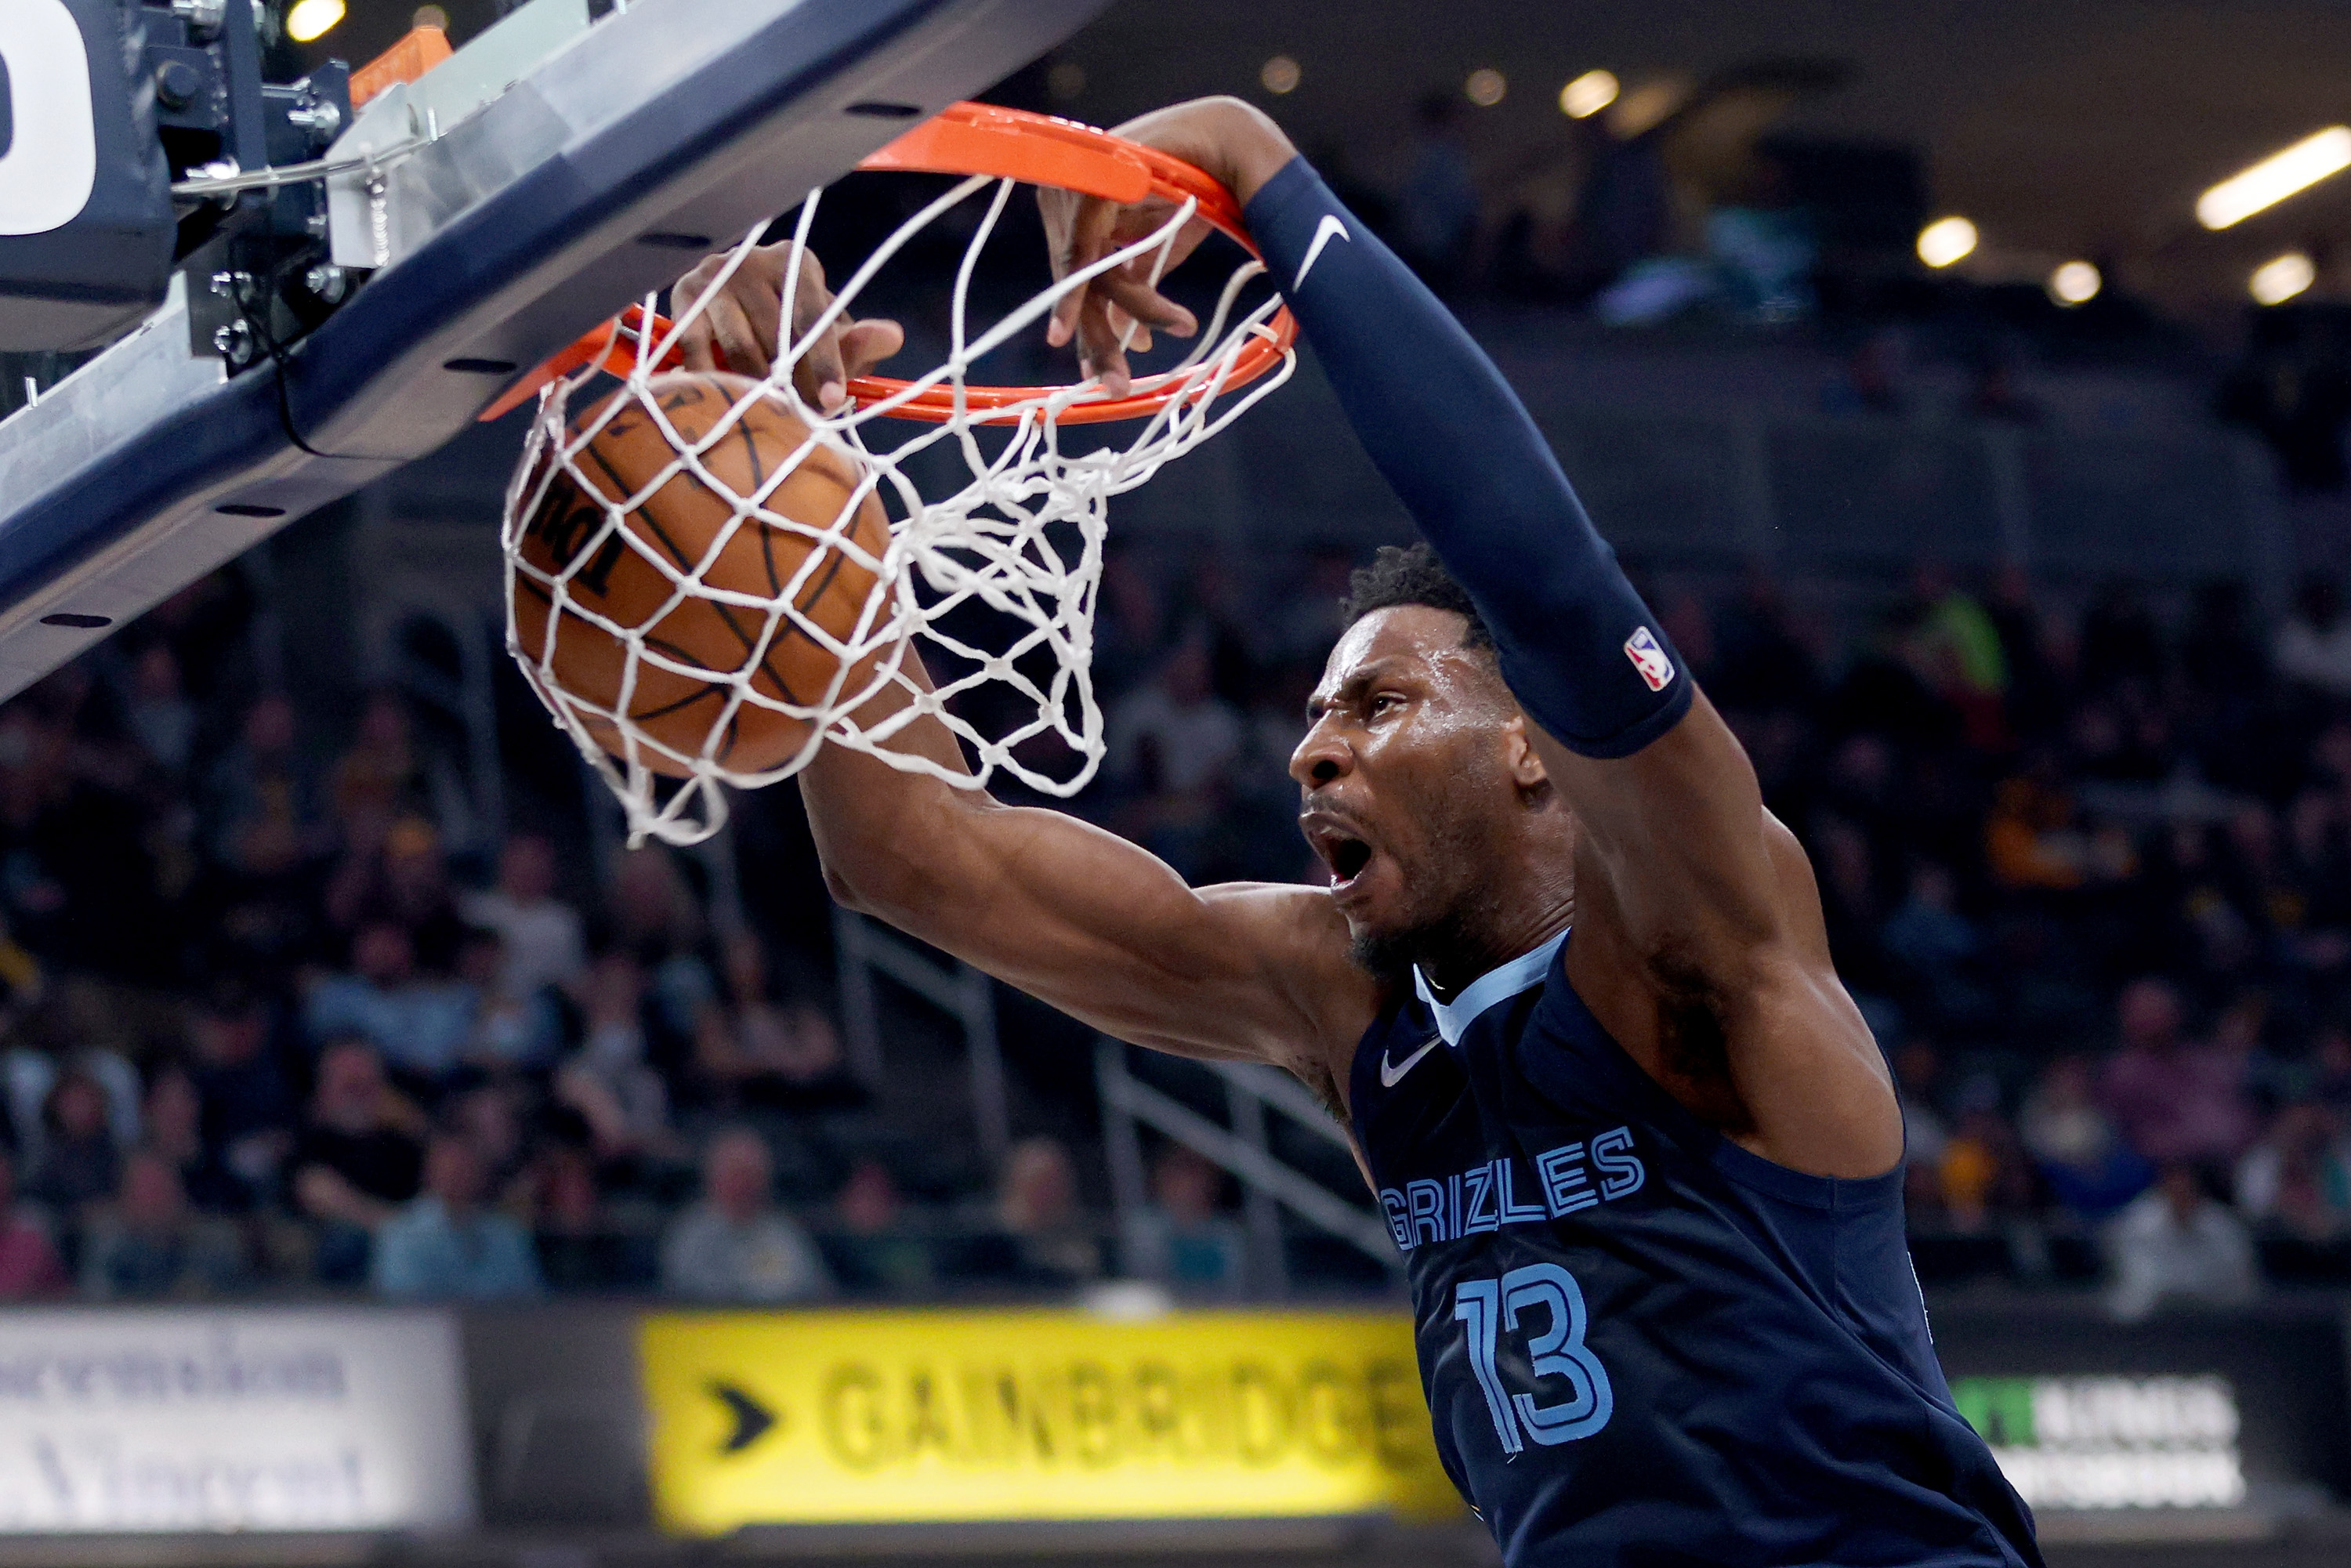 Memphis Grizzlies big man Jaren Jackson Jr. dunks the ball during a game against the Indiana Pacers in March 2022